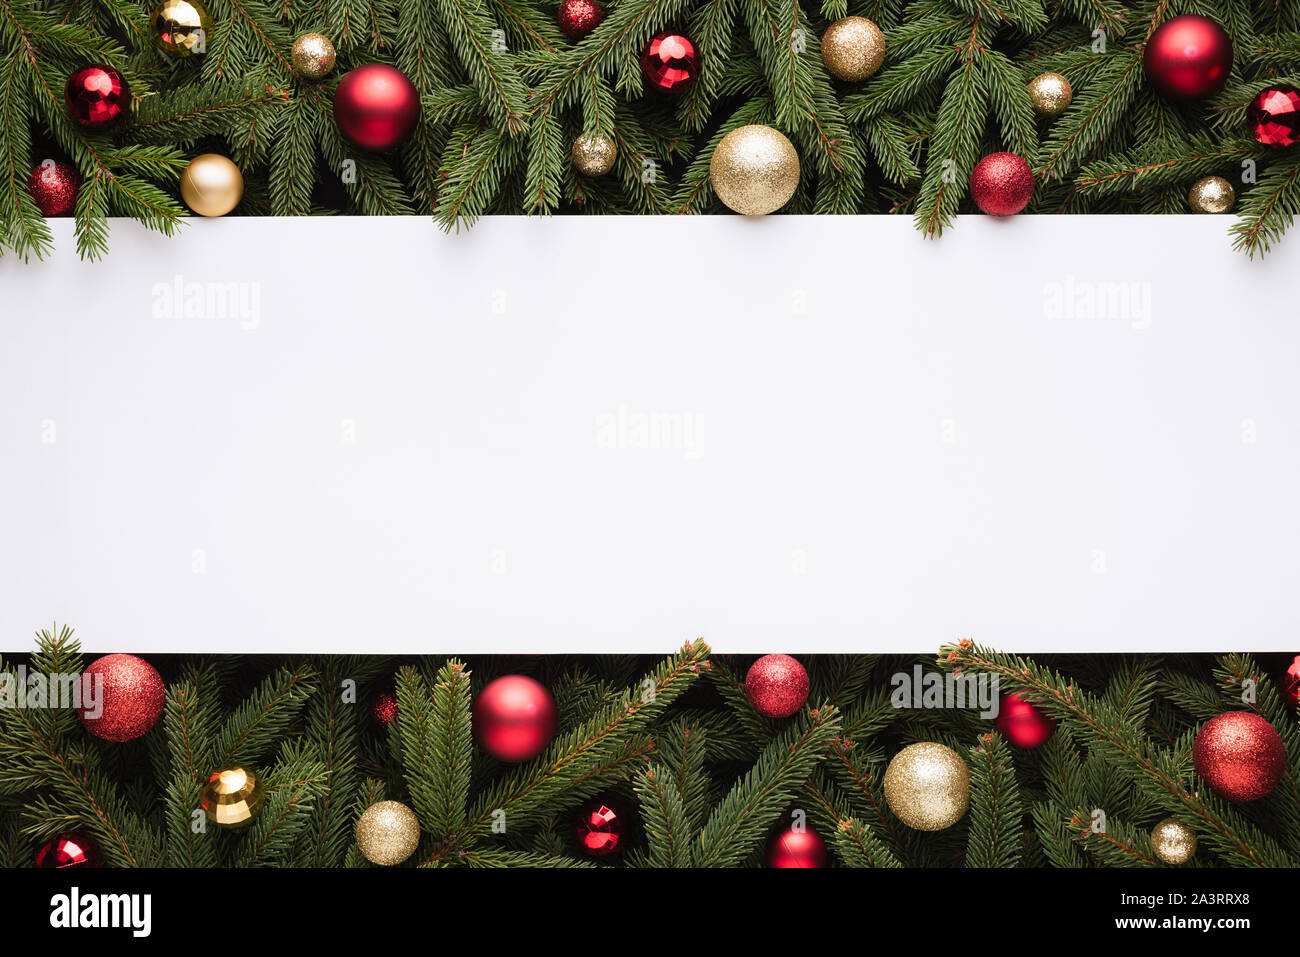 Christmas or New Year decoration background with copy space. Festive border of fir branches and Christmas balls Stock Photo